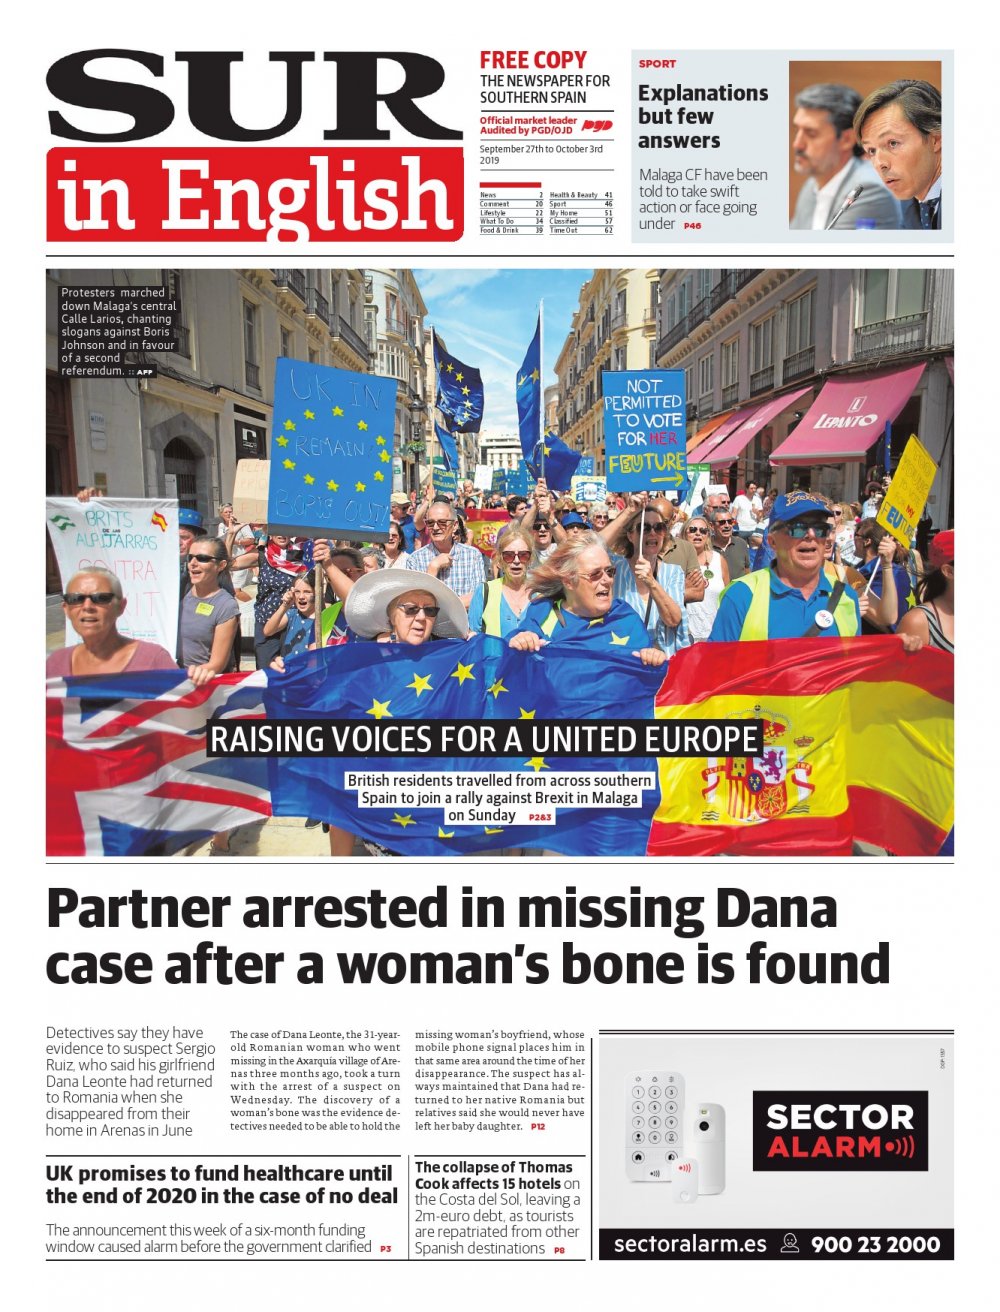 Print Edition SUR in English | September | 2019